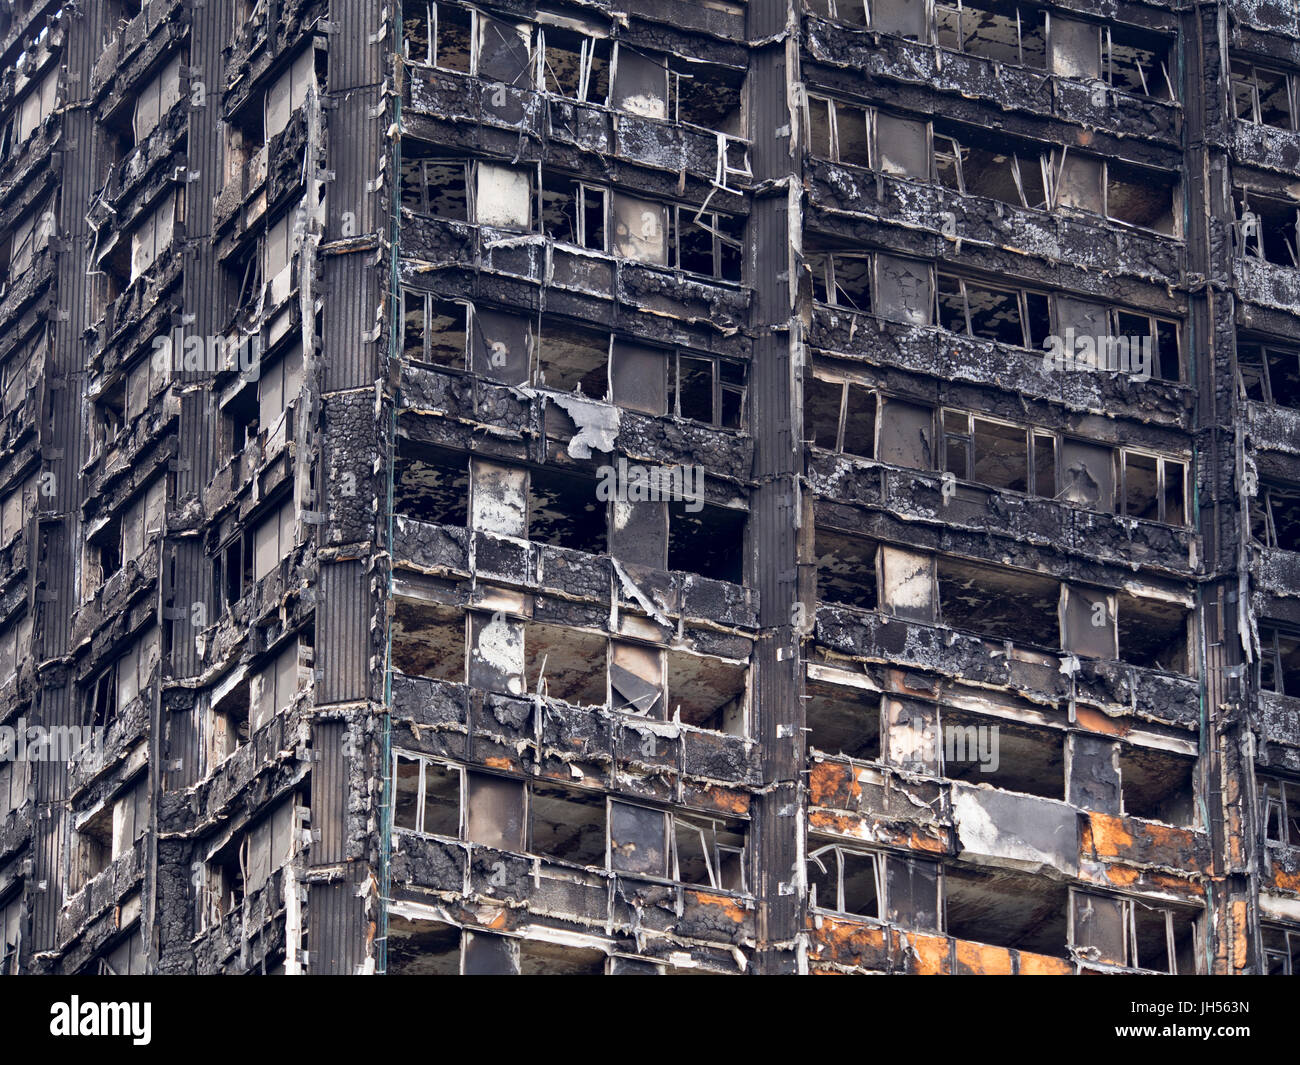 London, UK - Jul 4, 2017: Close up view of the Grenfell Tower block in which at least 80 people are thought to have died following a fire. Stock Photo